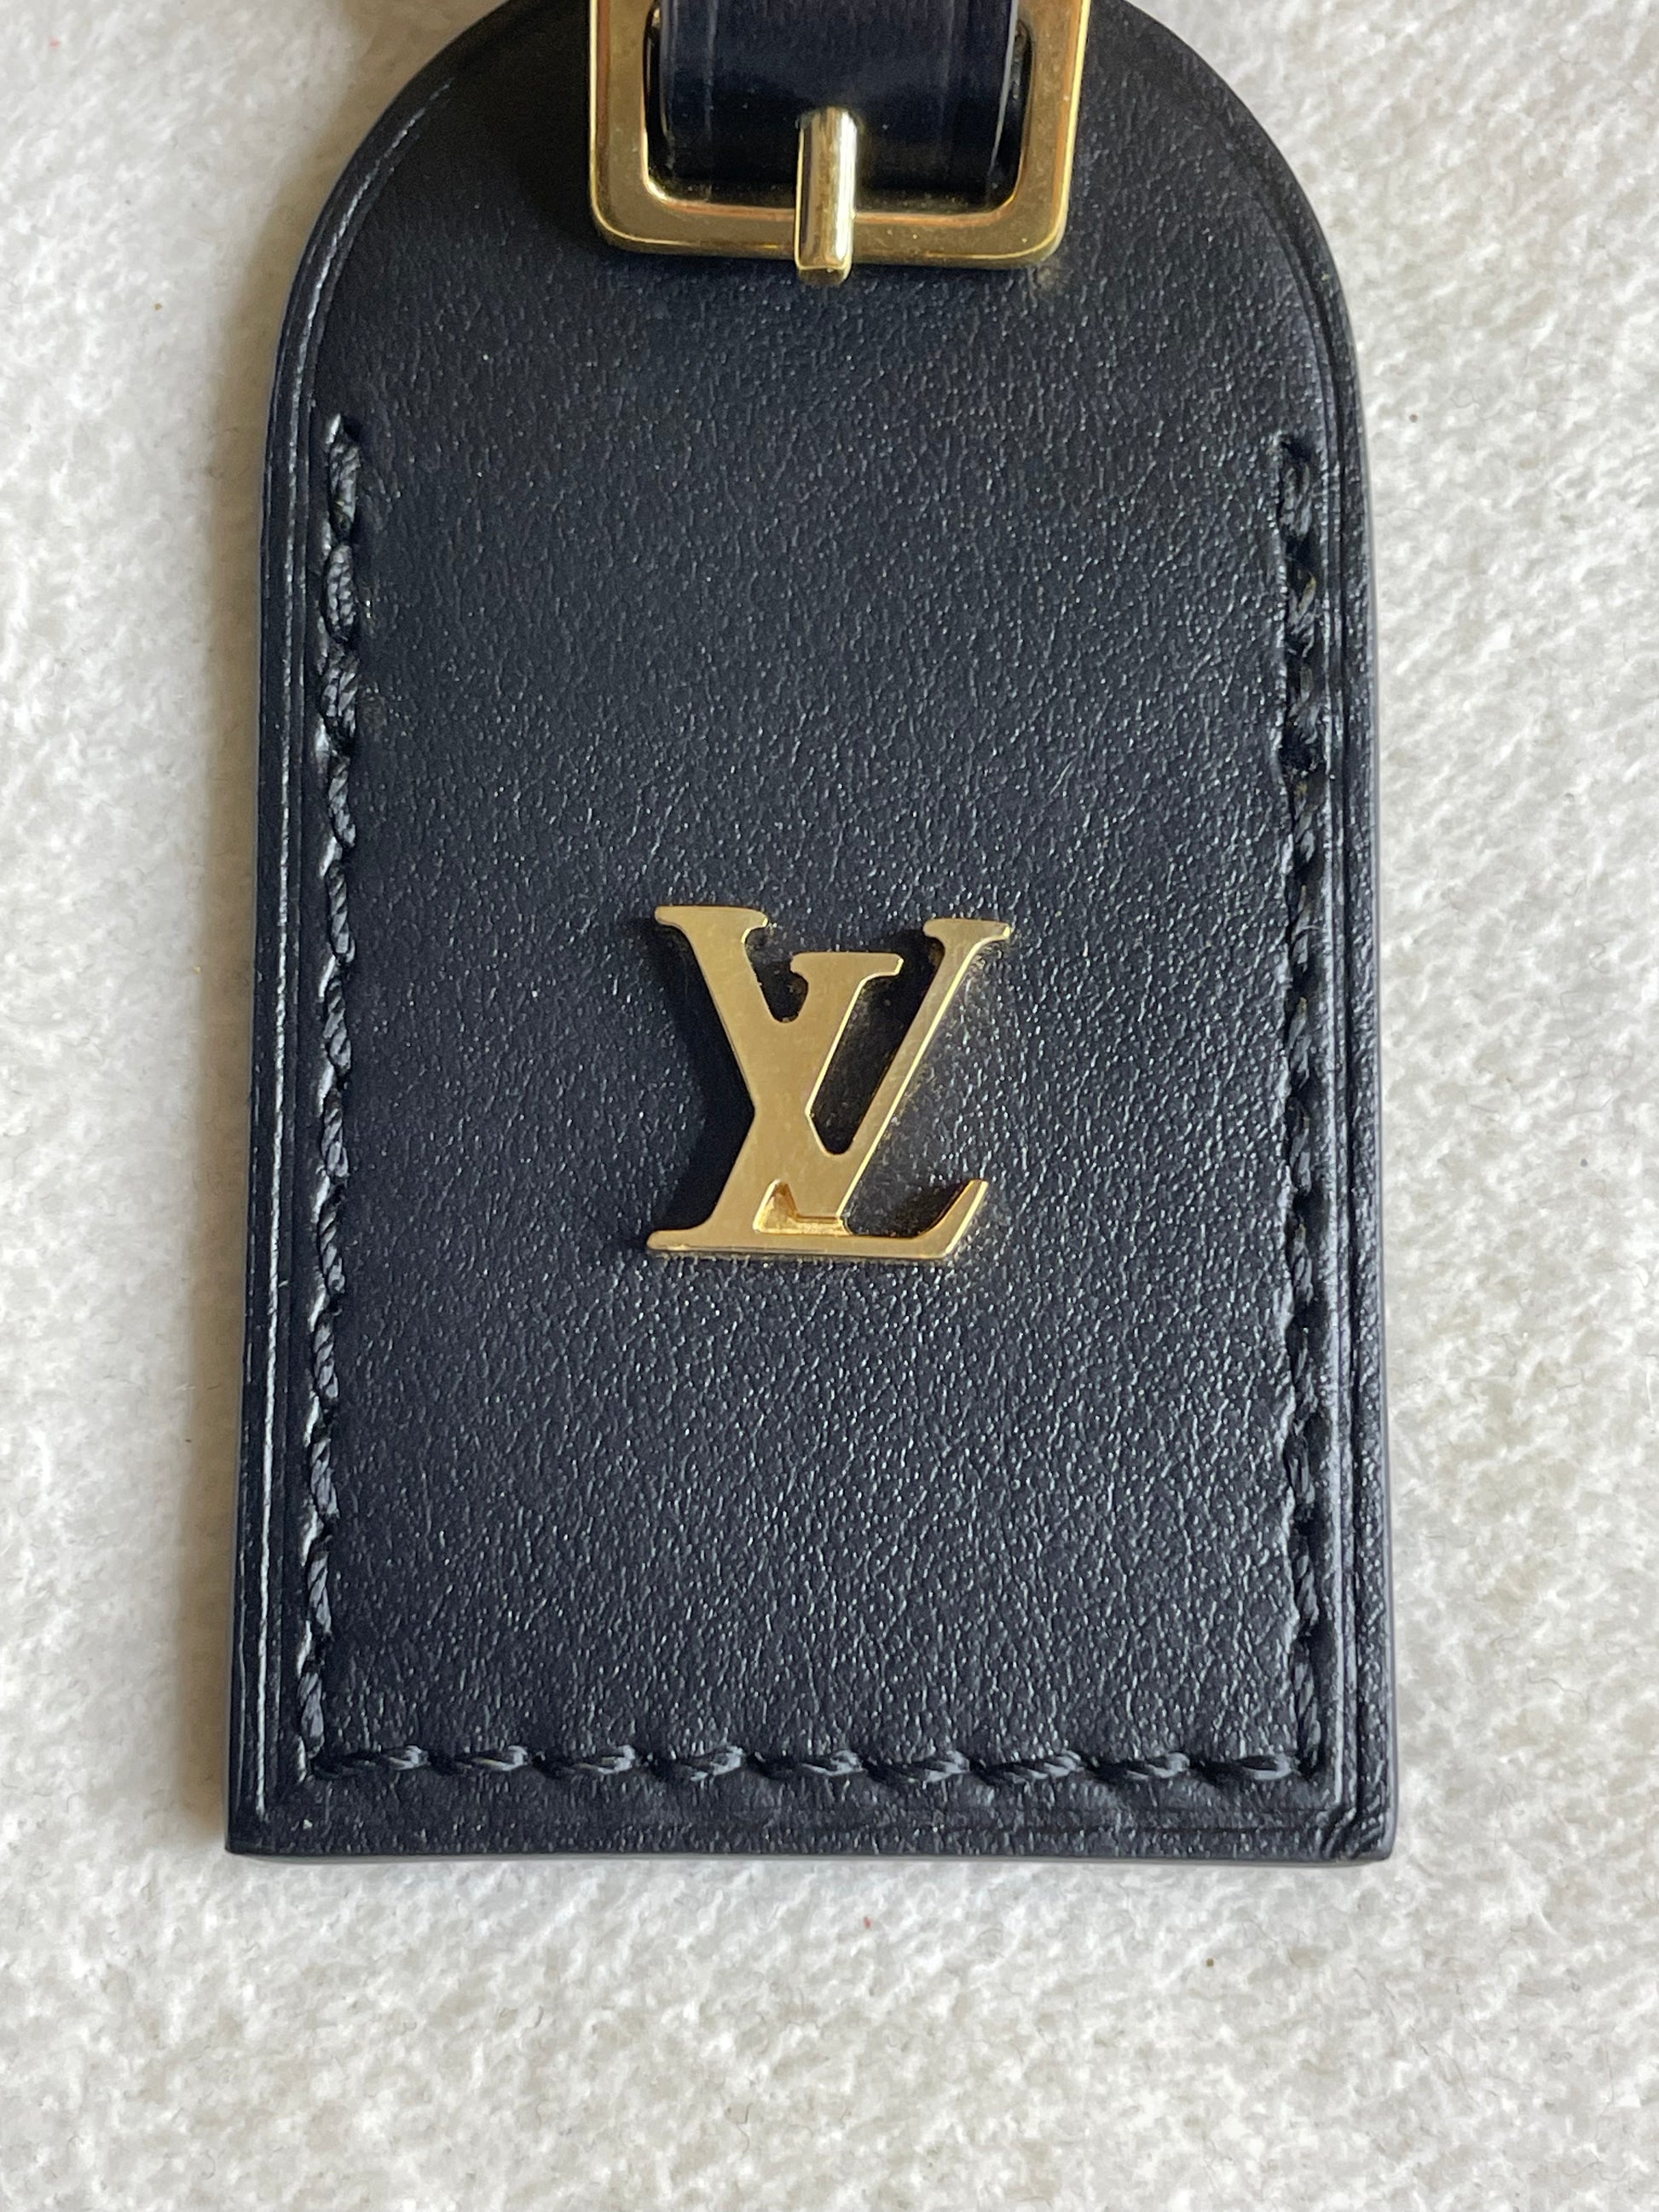 Authentic Louis Vuitton Odeon PM Luggage Tag – TLB Preloved Goods